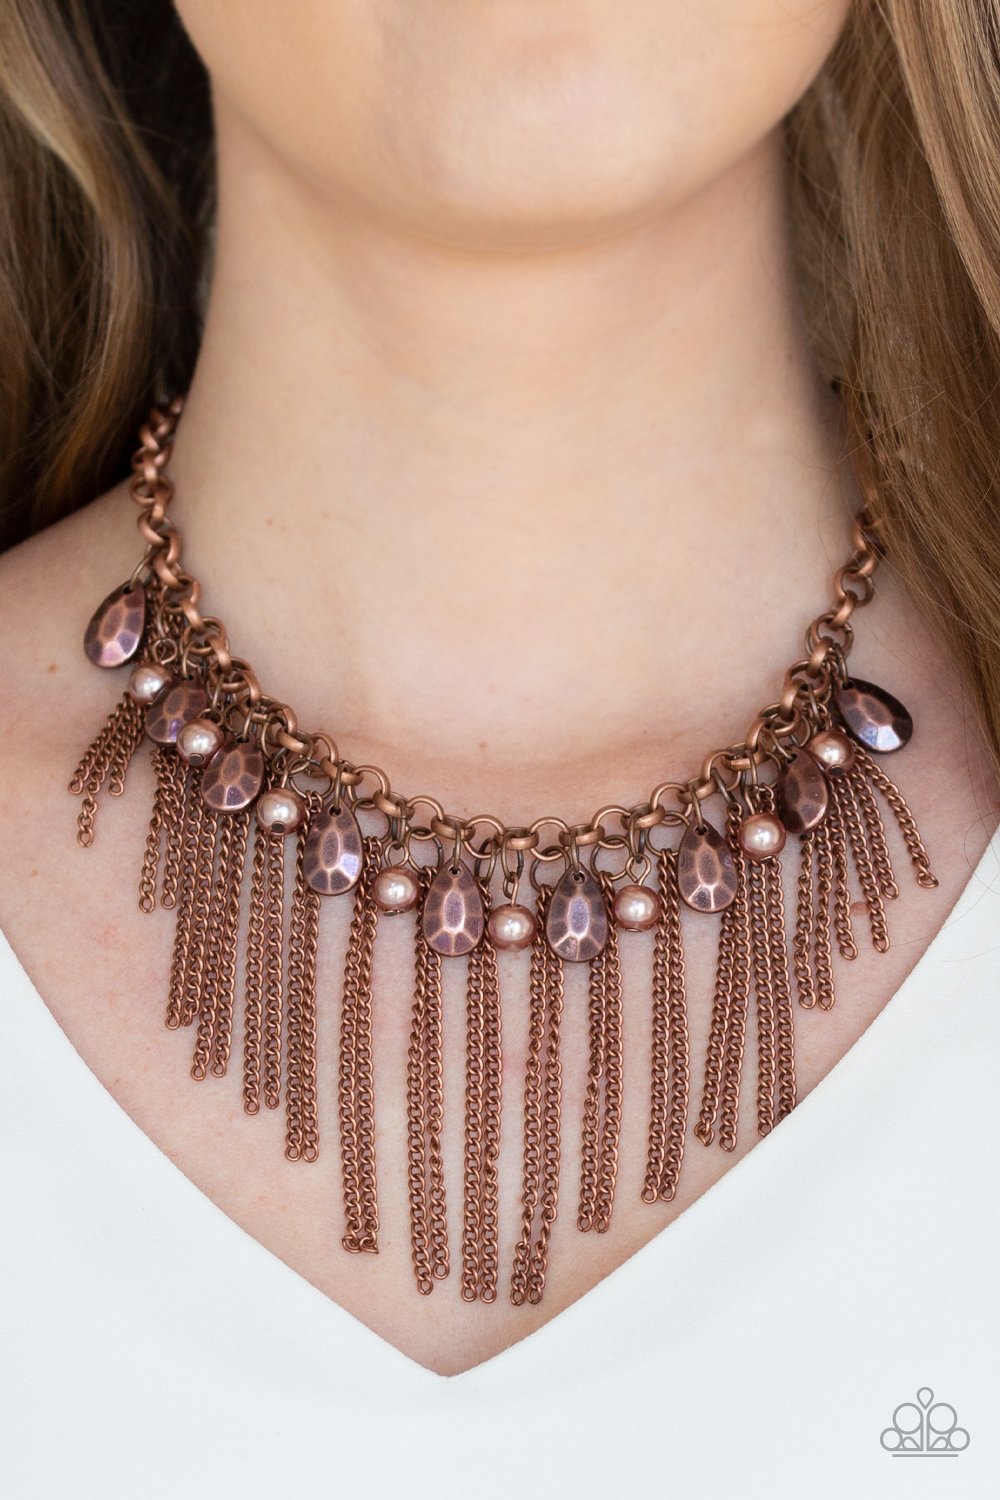 Industrial Intensity Copper Necklace - Paparazzi Accessories - Bejeweled Accessories By Kristie - A collection of faceted copper teardrops and pearly copper beads drip from the bottom of an antiqued copper chain. Pairs of copper chains stream from the of the chain, creating a intensely tapered fringe below the collar.